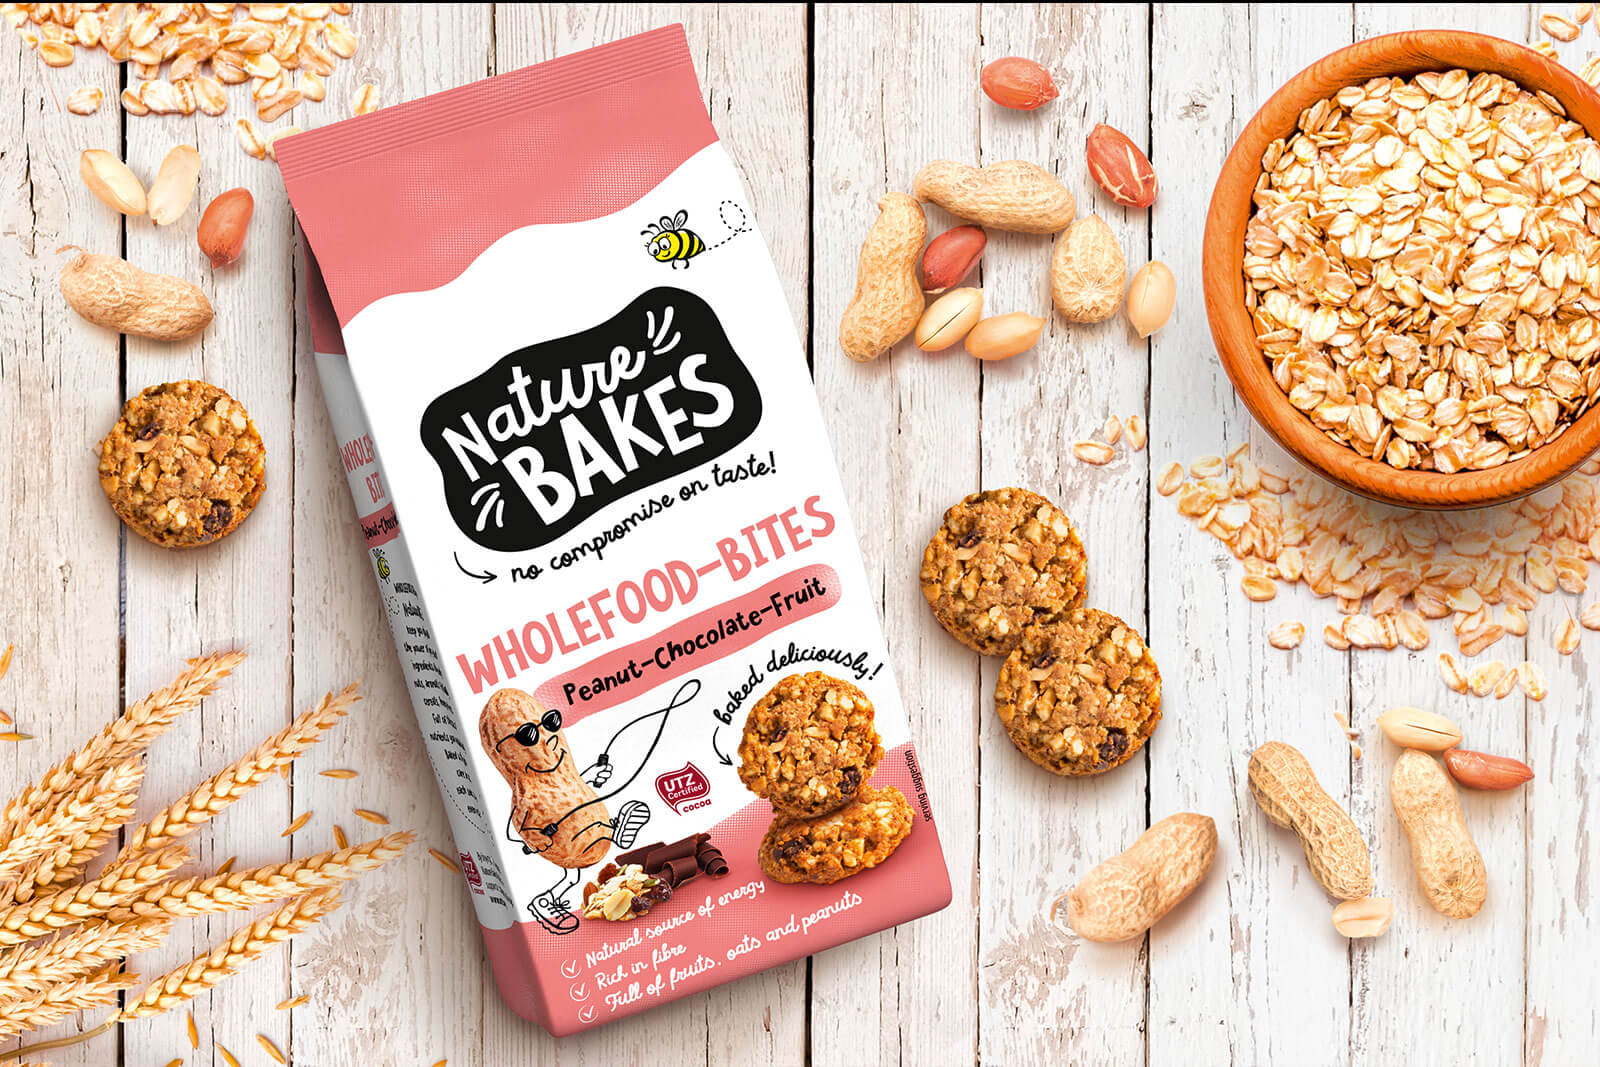 hellema nature bakes wholefood bites design packaging rubicon